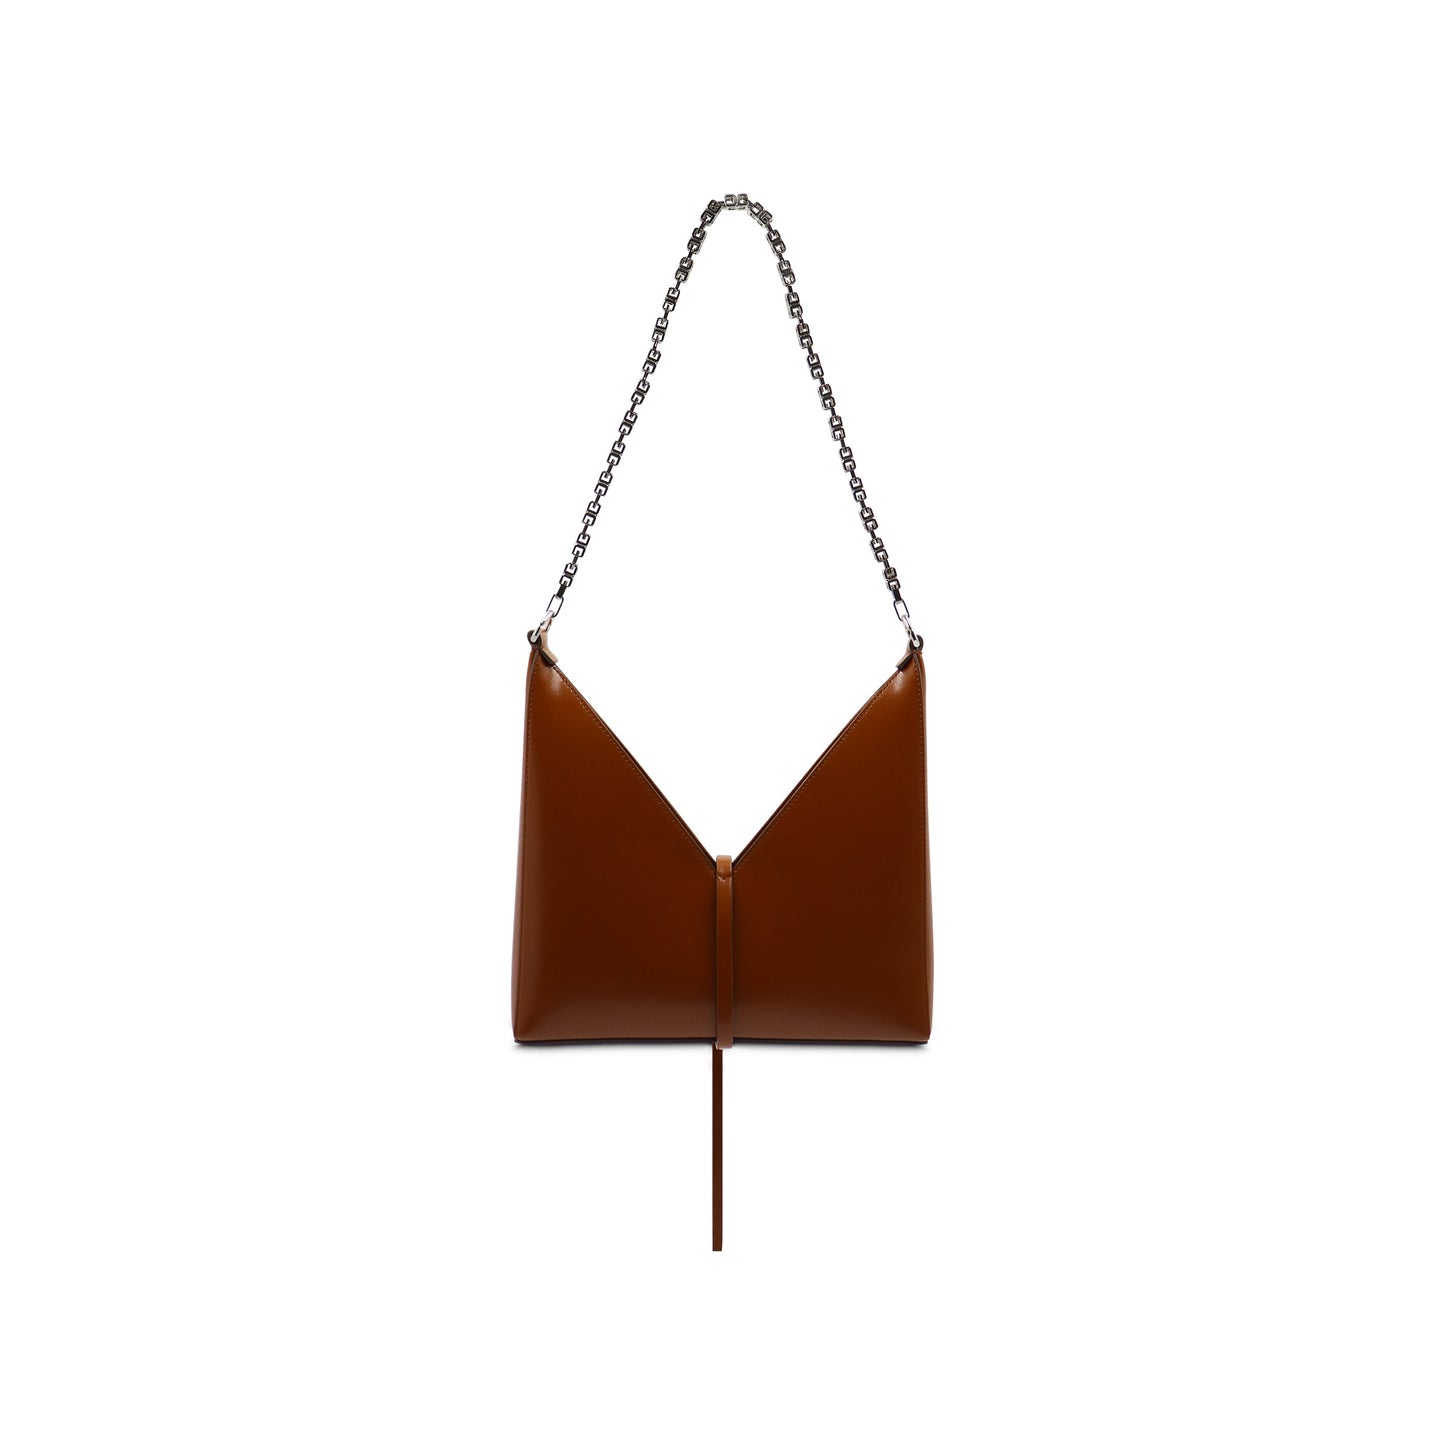 Small Cut Out Bag with Chain in Box Leather in Chestnut